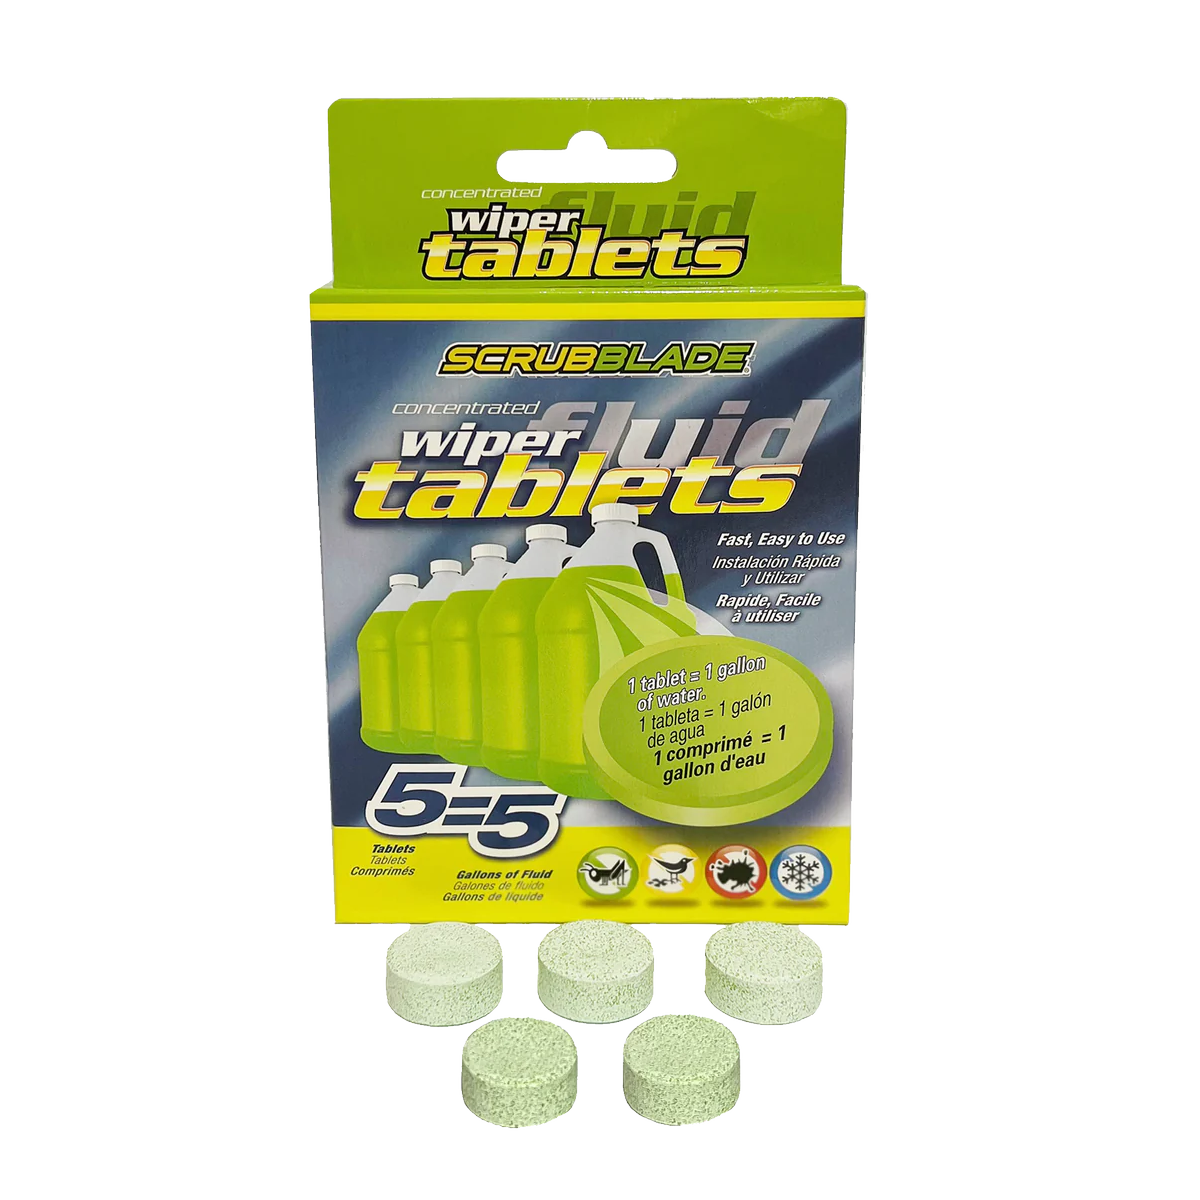 Windshield Washer Fluid Tablets, Each Tablet Makes 1-Gallon of